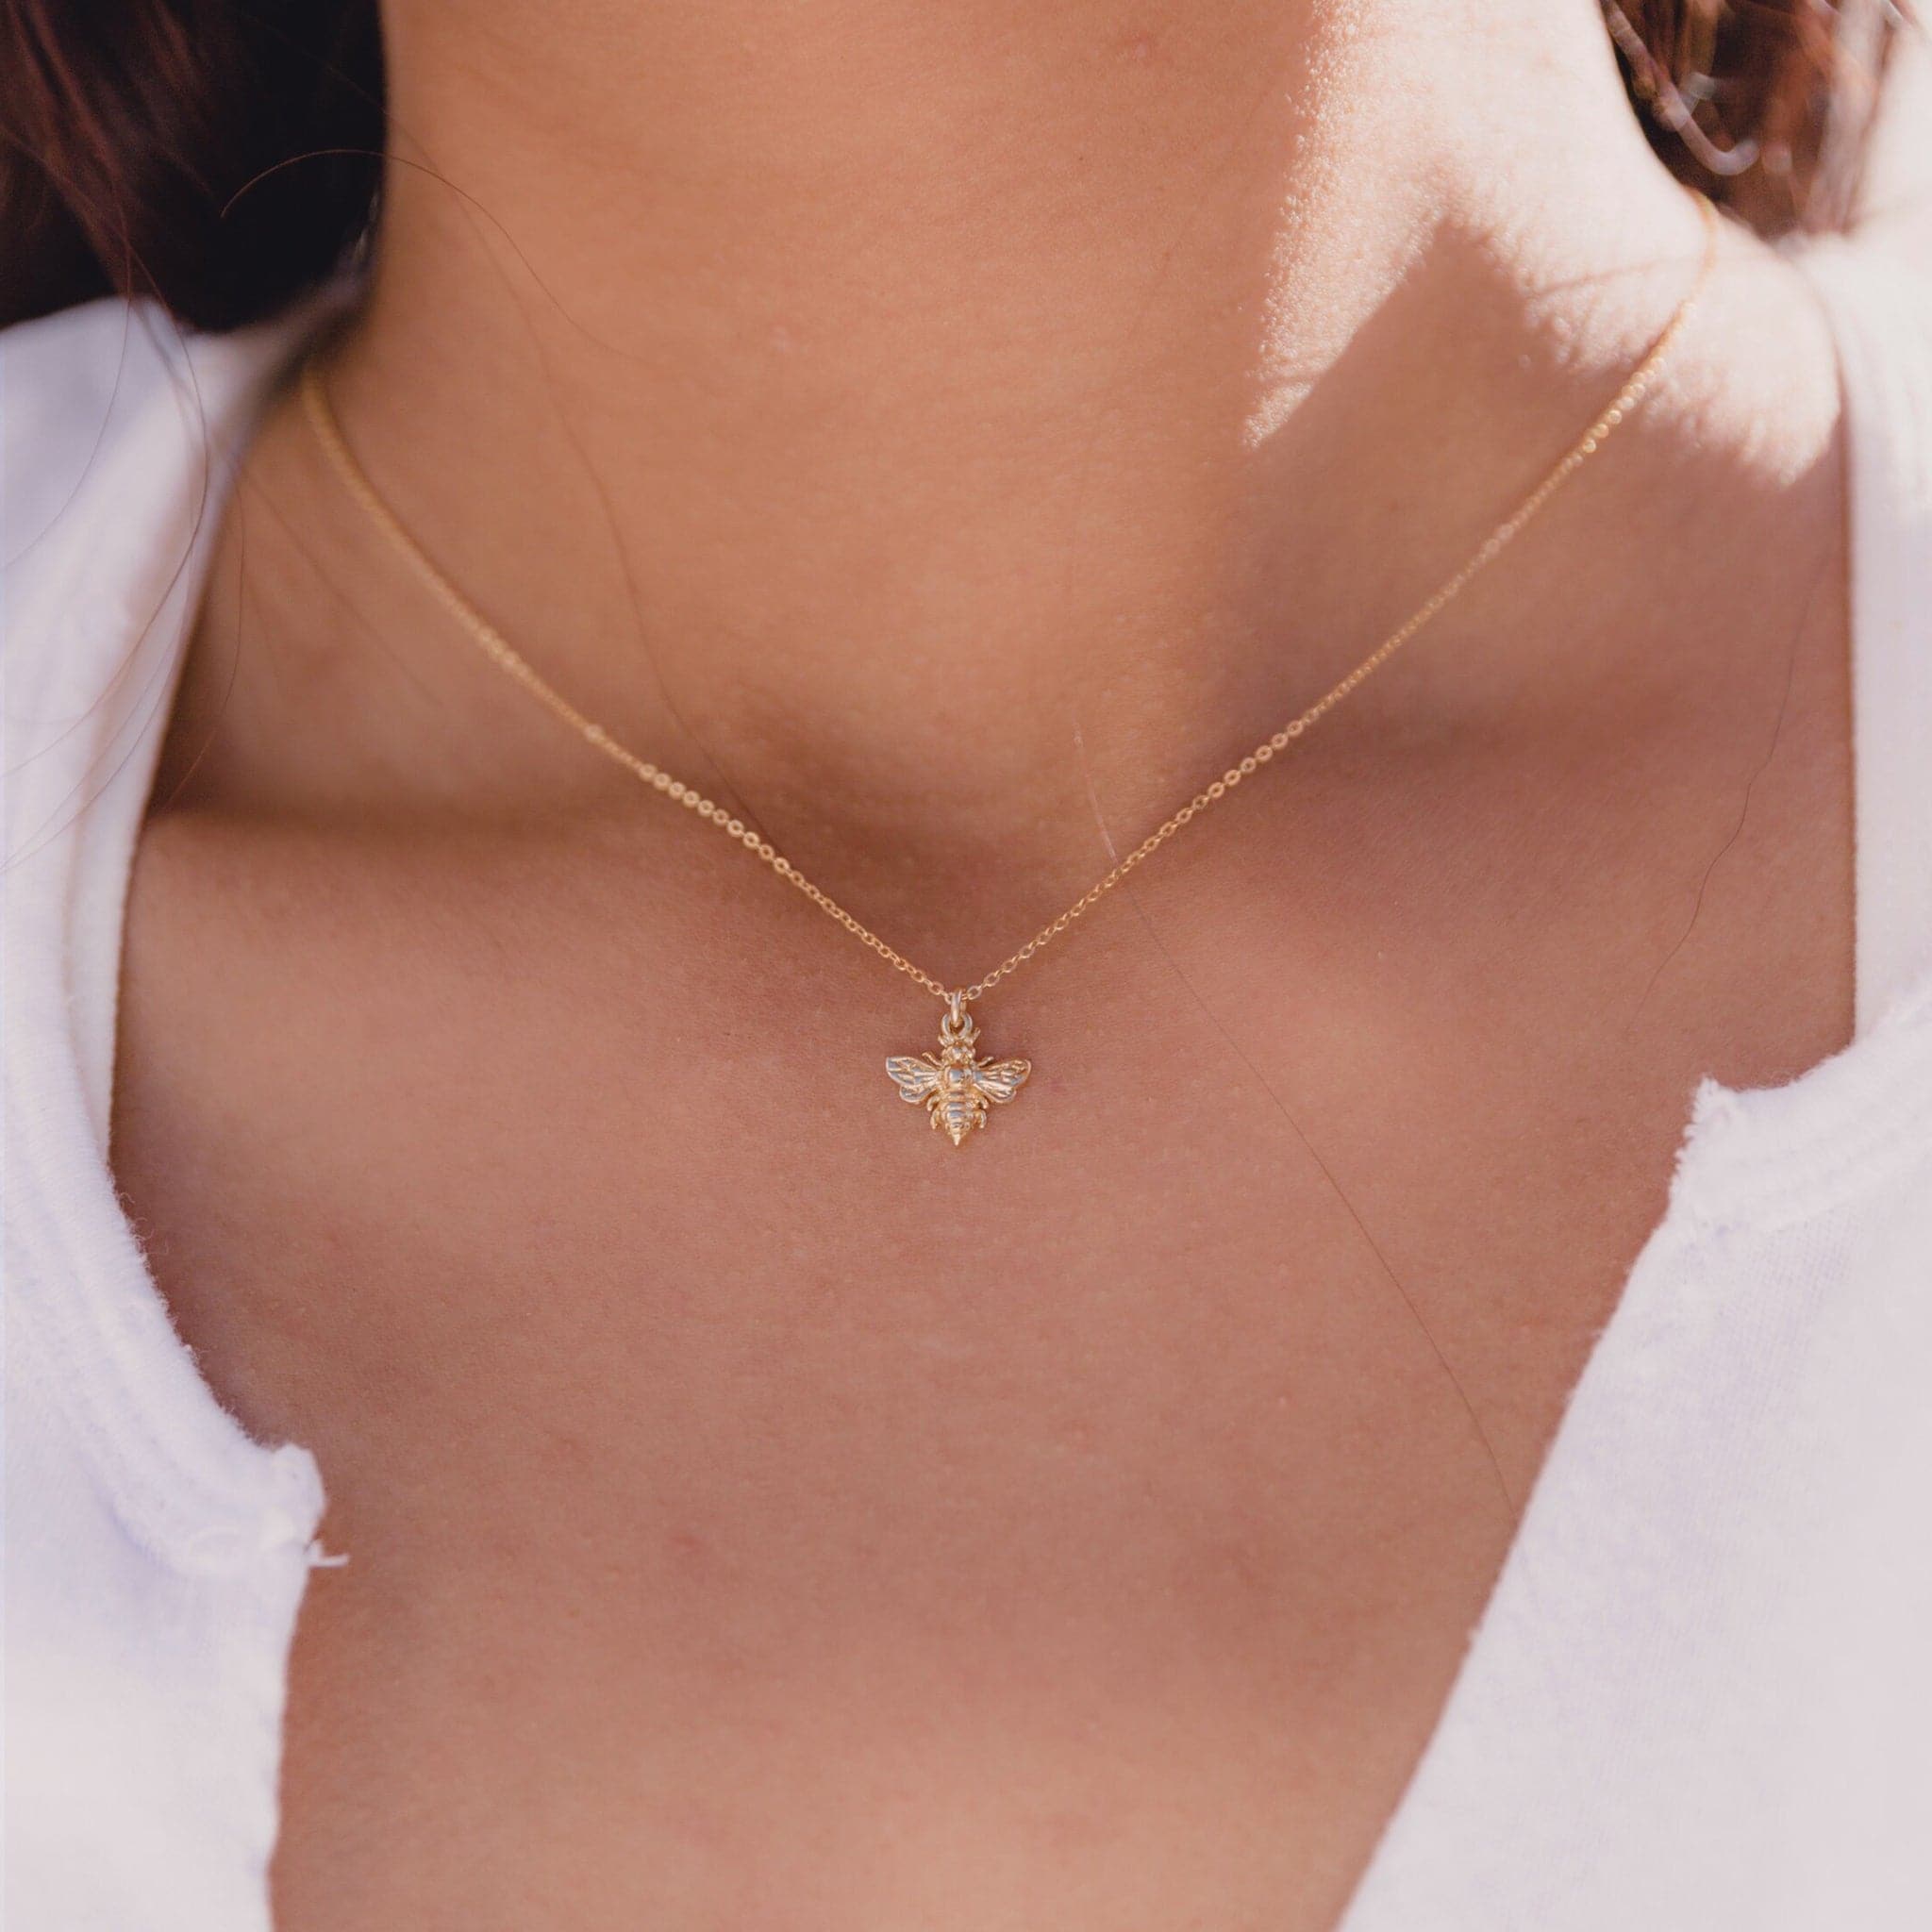 This is a picture of a woman’s neck. She is wearing a white shirt. Around her neck is a thin gold chain with a small gold bee charm in the middle. 